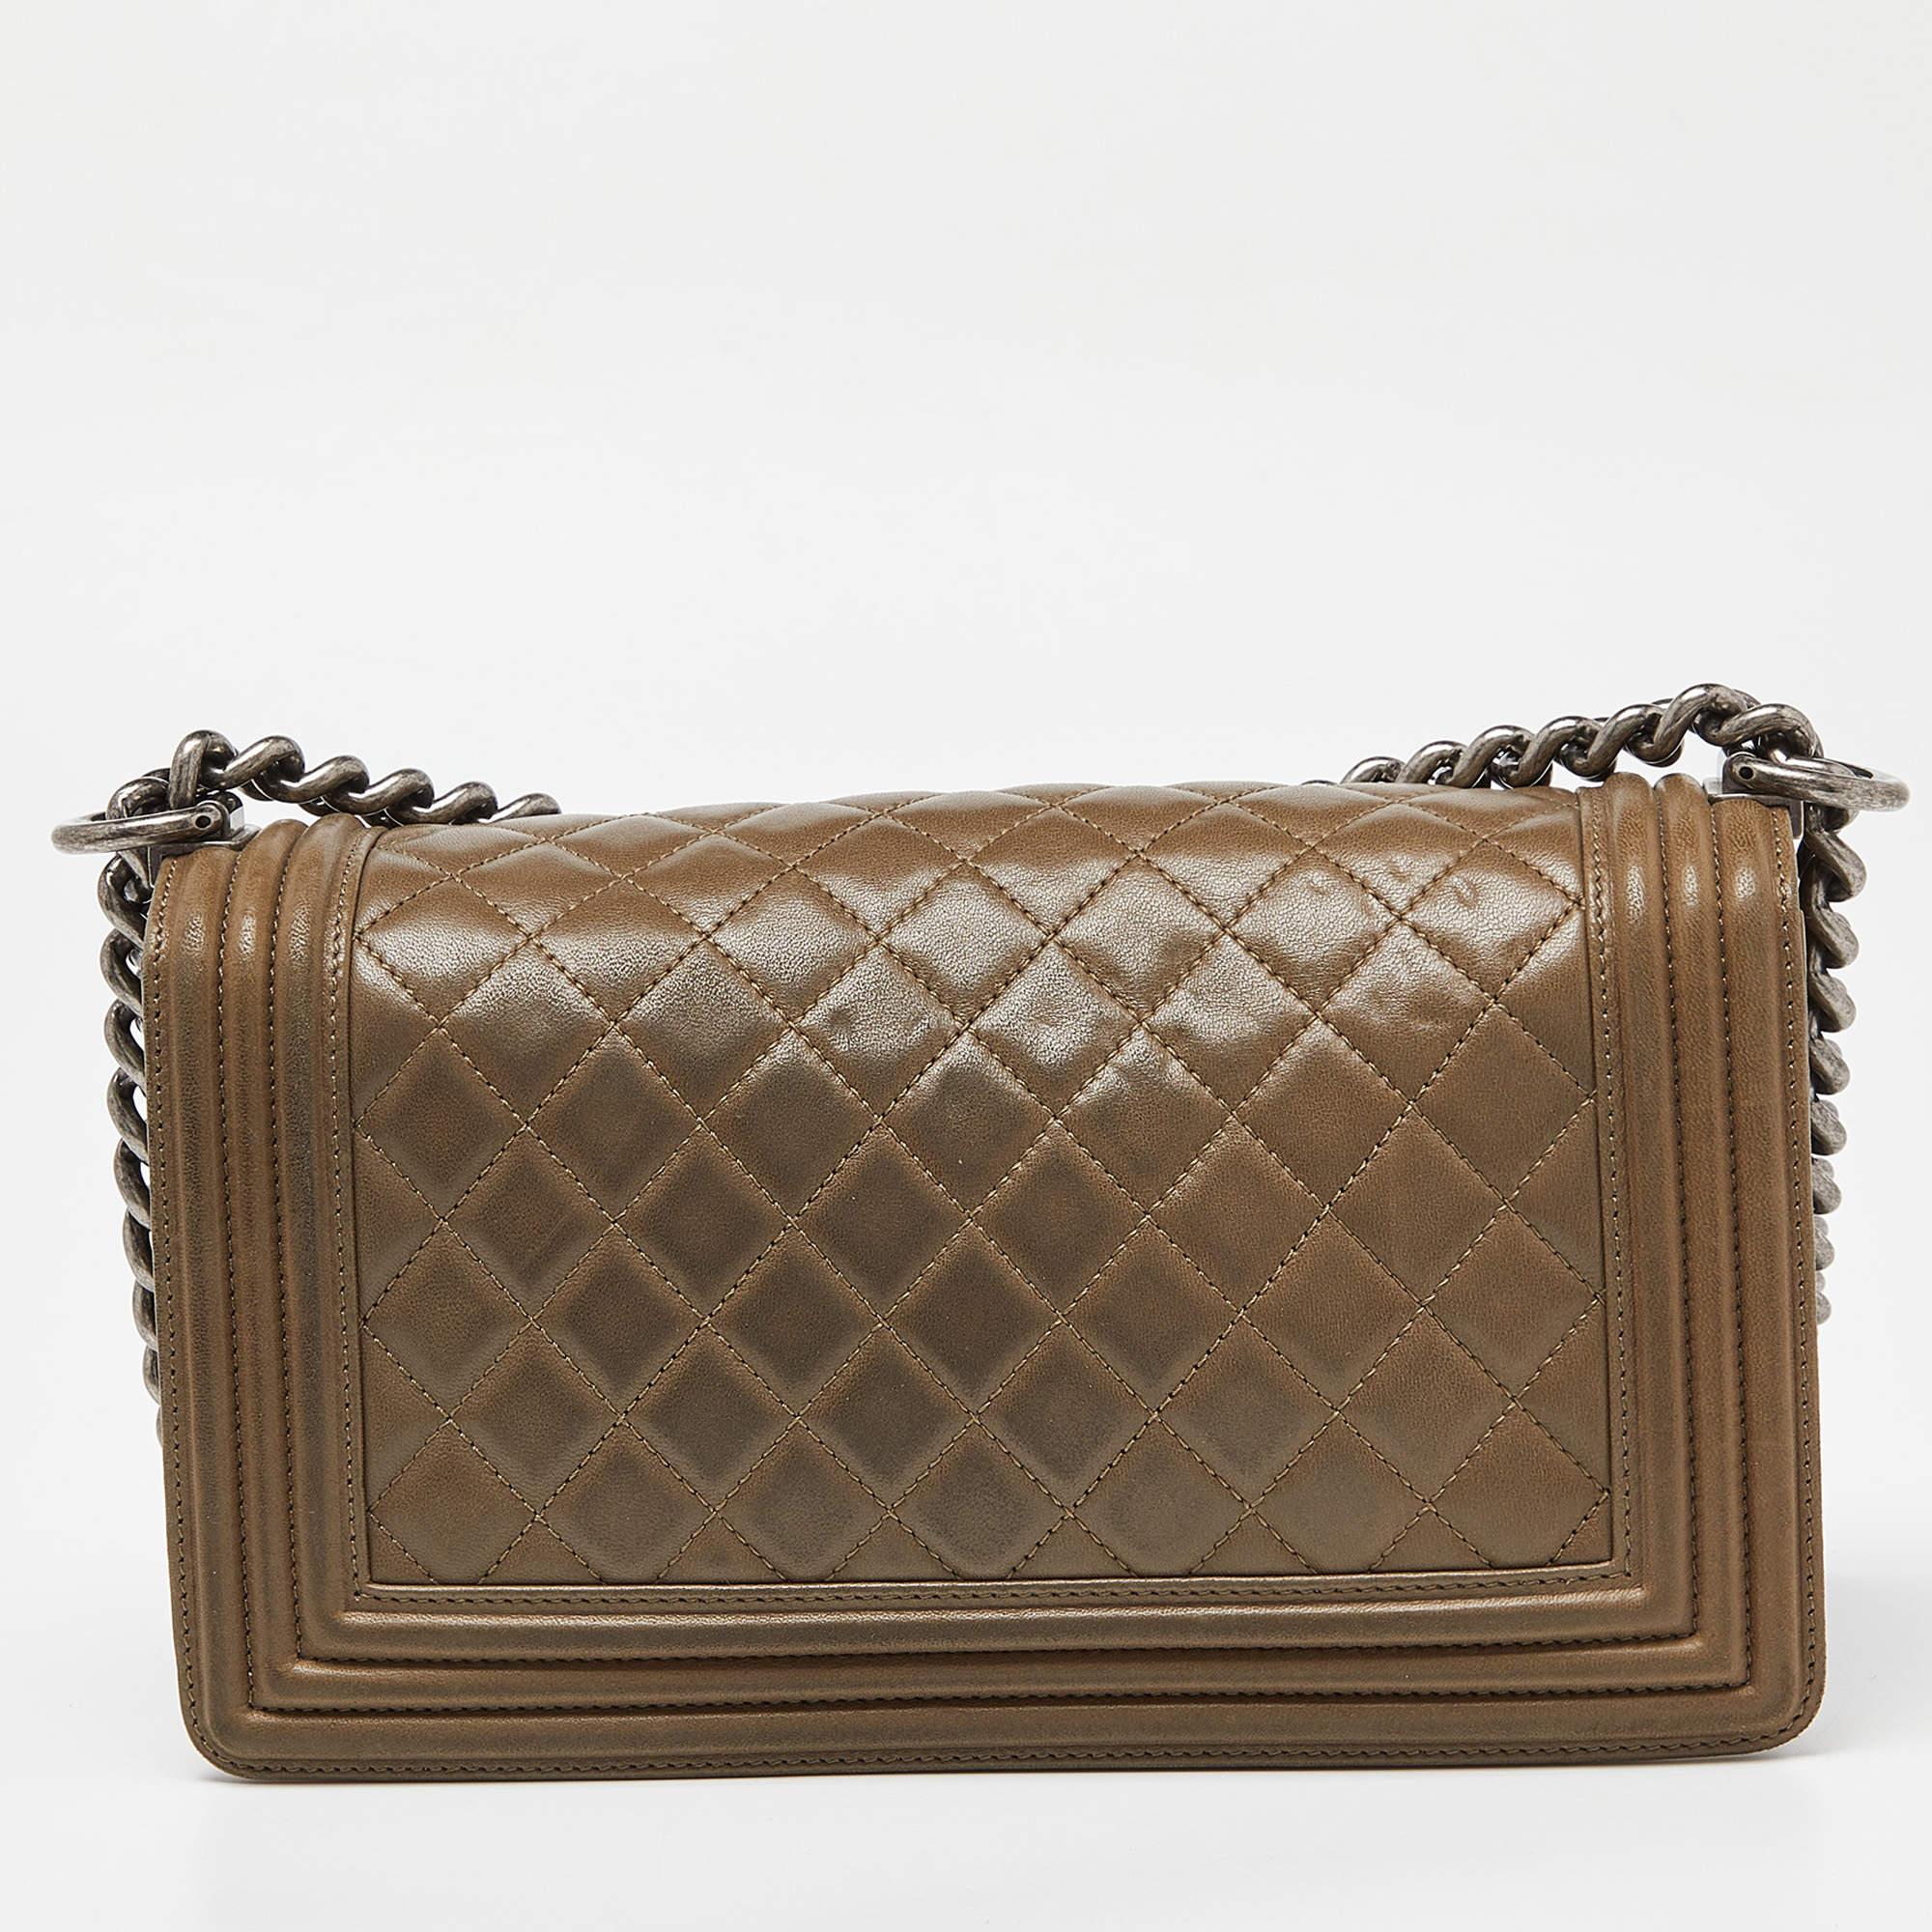 Chanel Green Quilted Leather Medium Boy Flap Bag For Sale 9